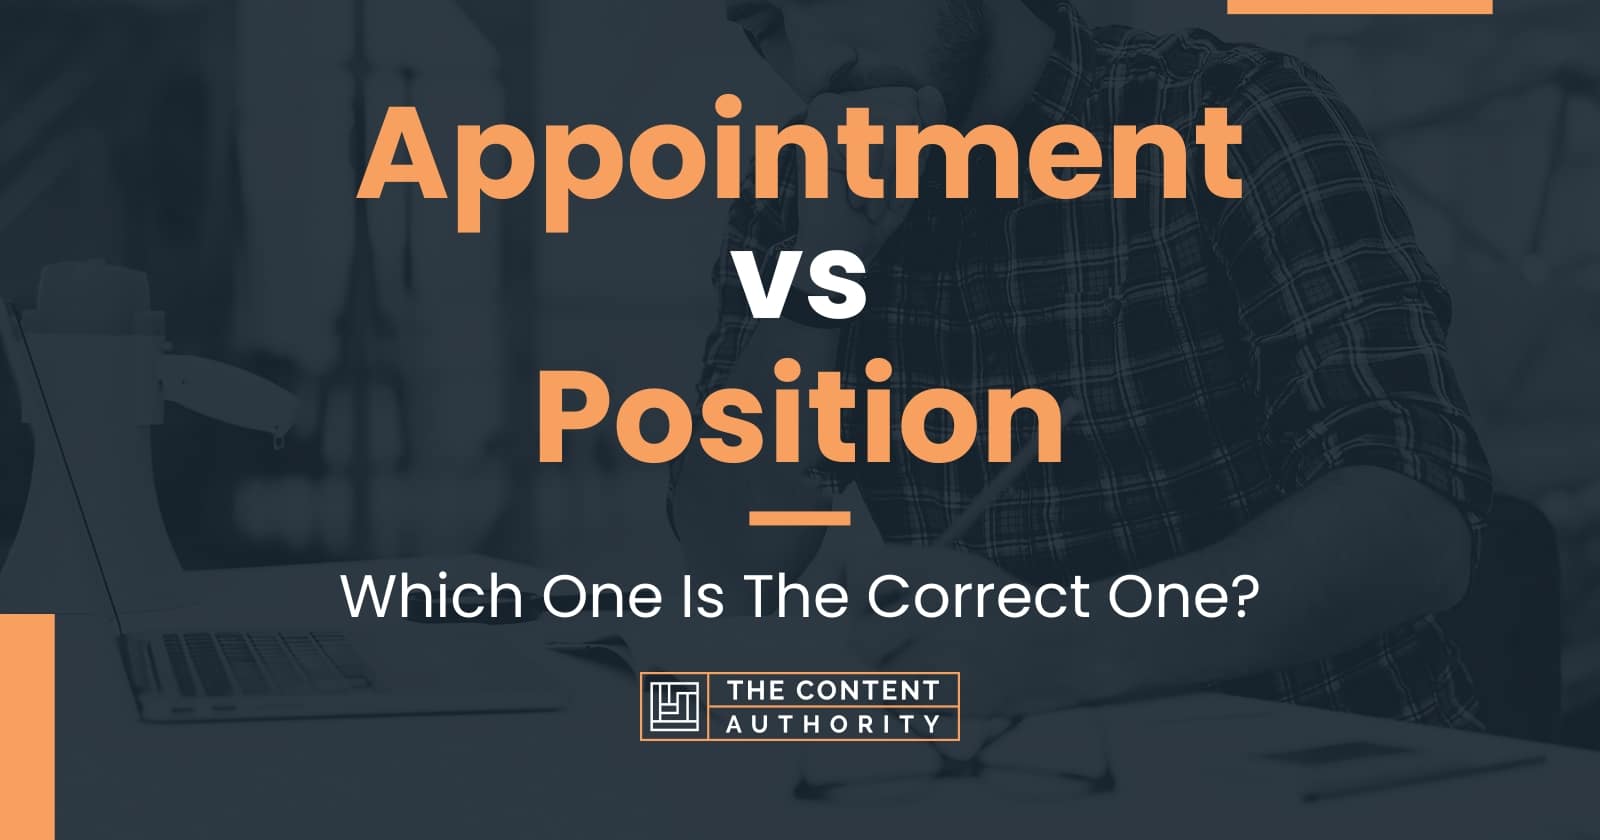 appointment vs assignment